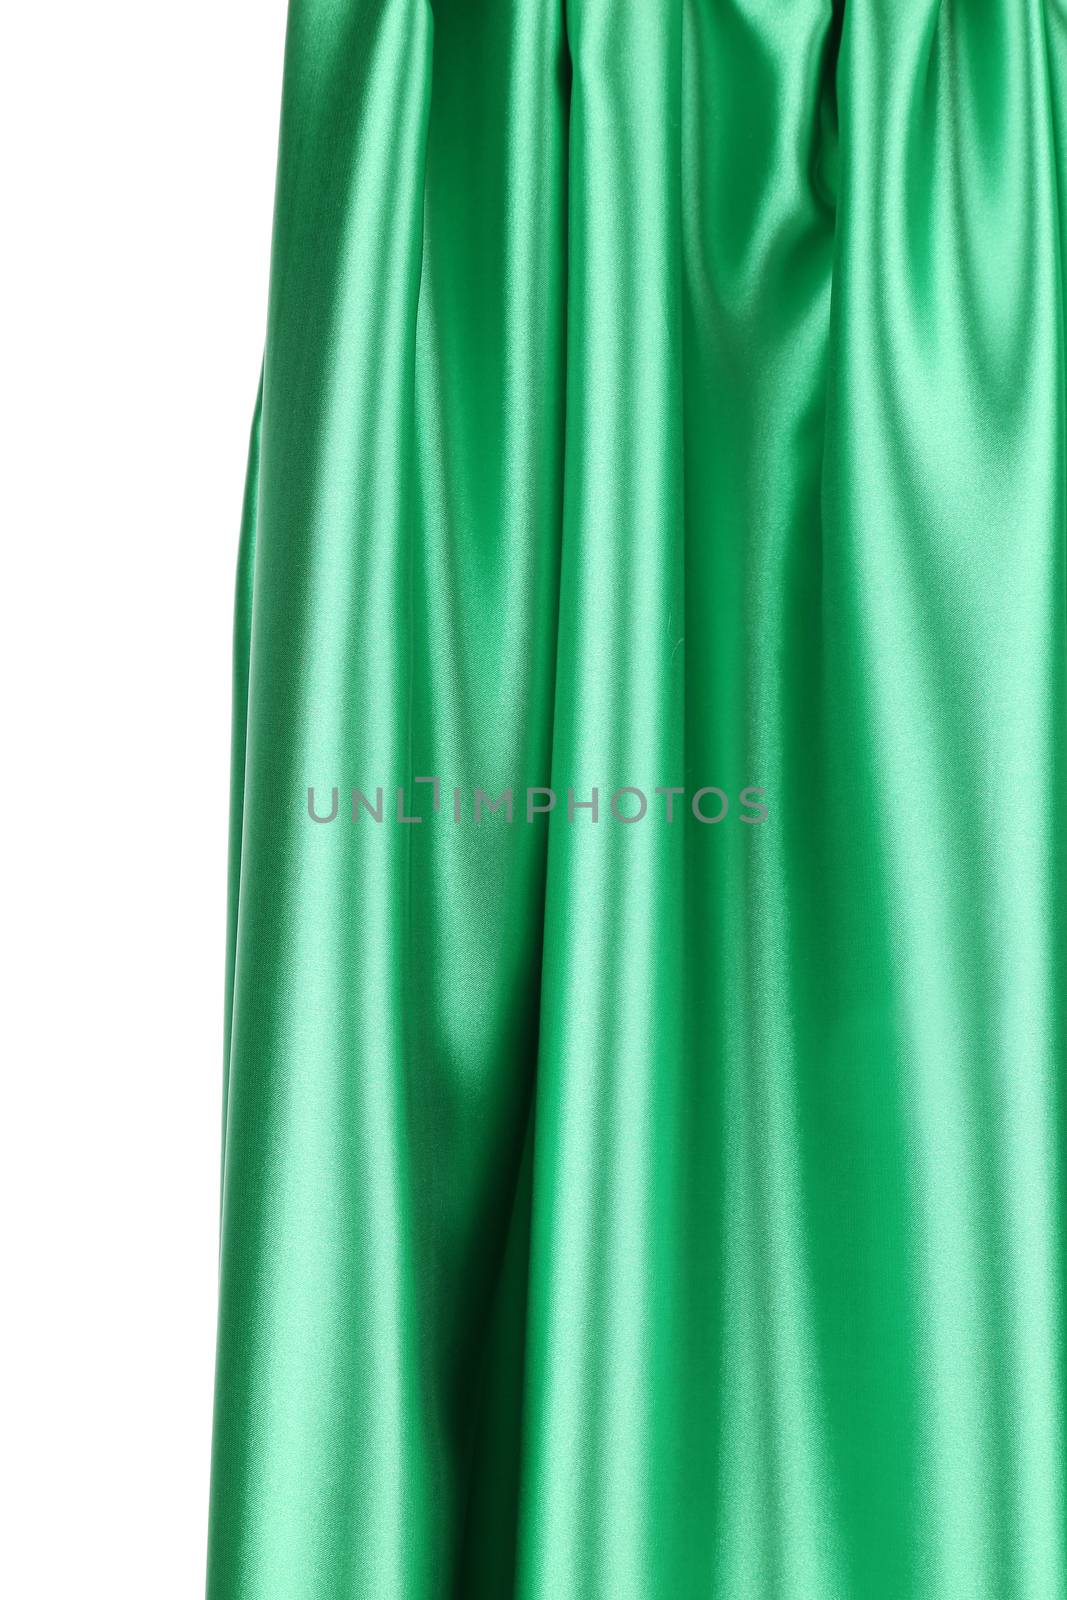 Creases in green fabric. Close up. by indigolotos